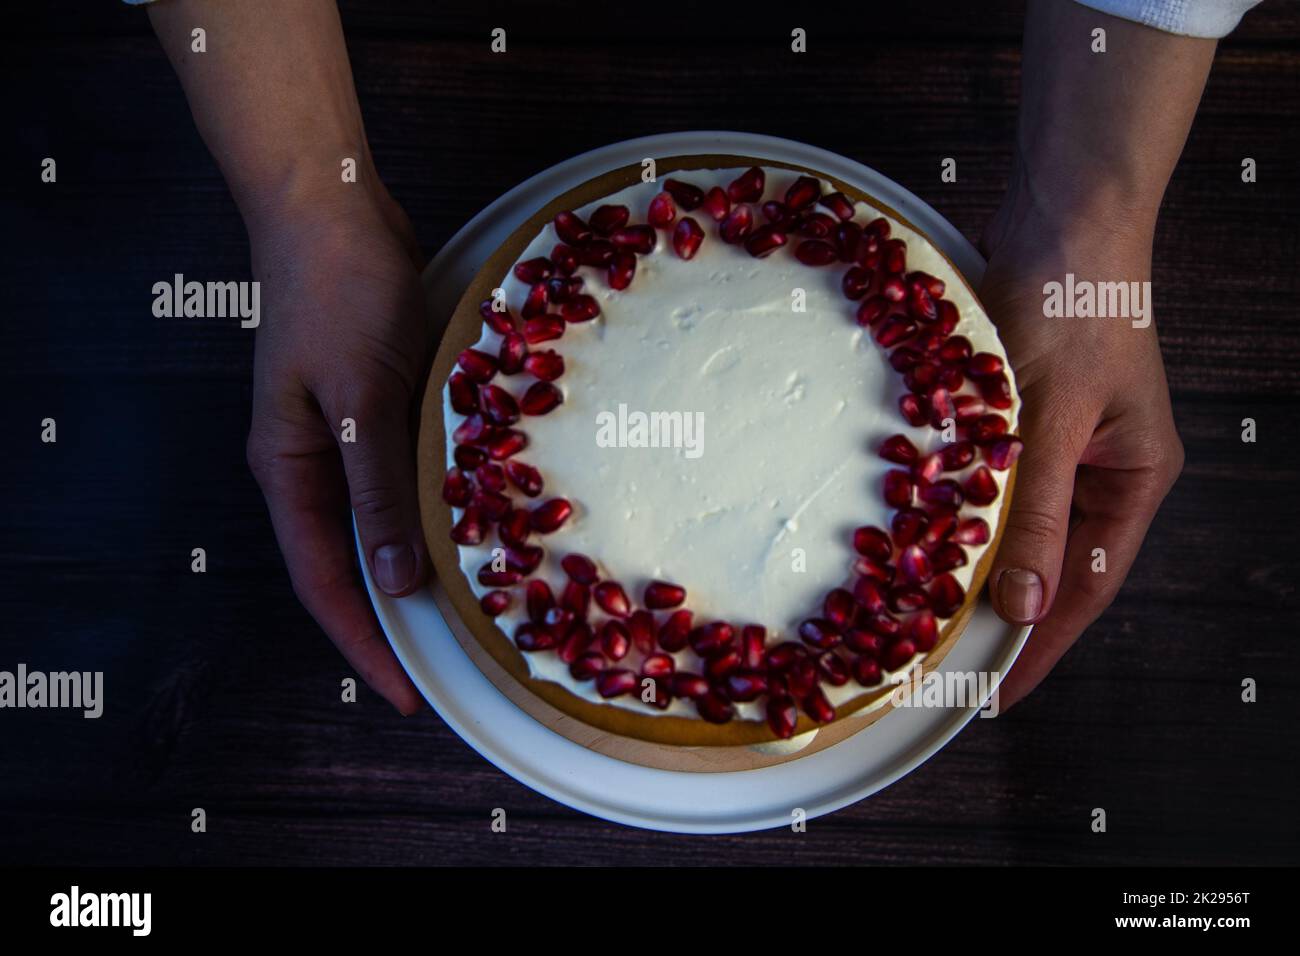 A cake of three layers, consisting of cakes and white cream, decorated with pomegranate on top, is held in the hands of a cook on a dark background, top view Stock Photo